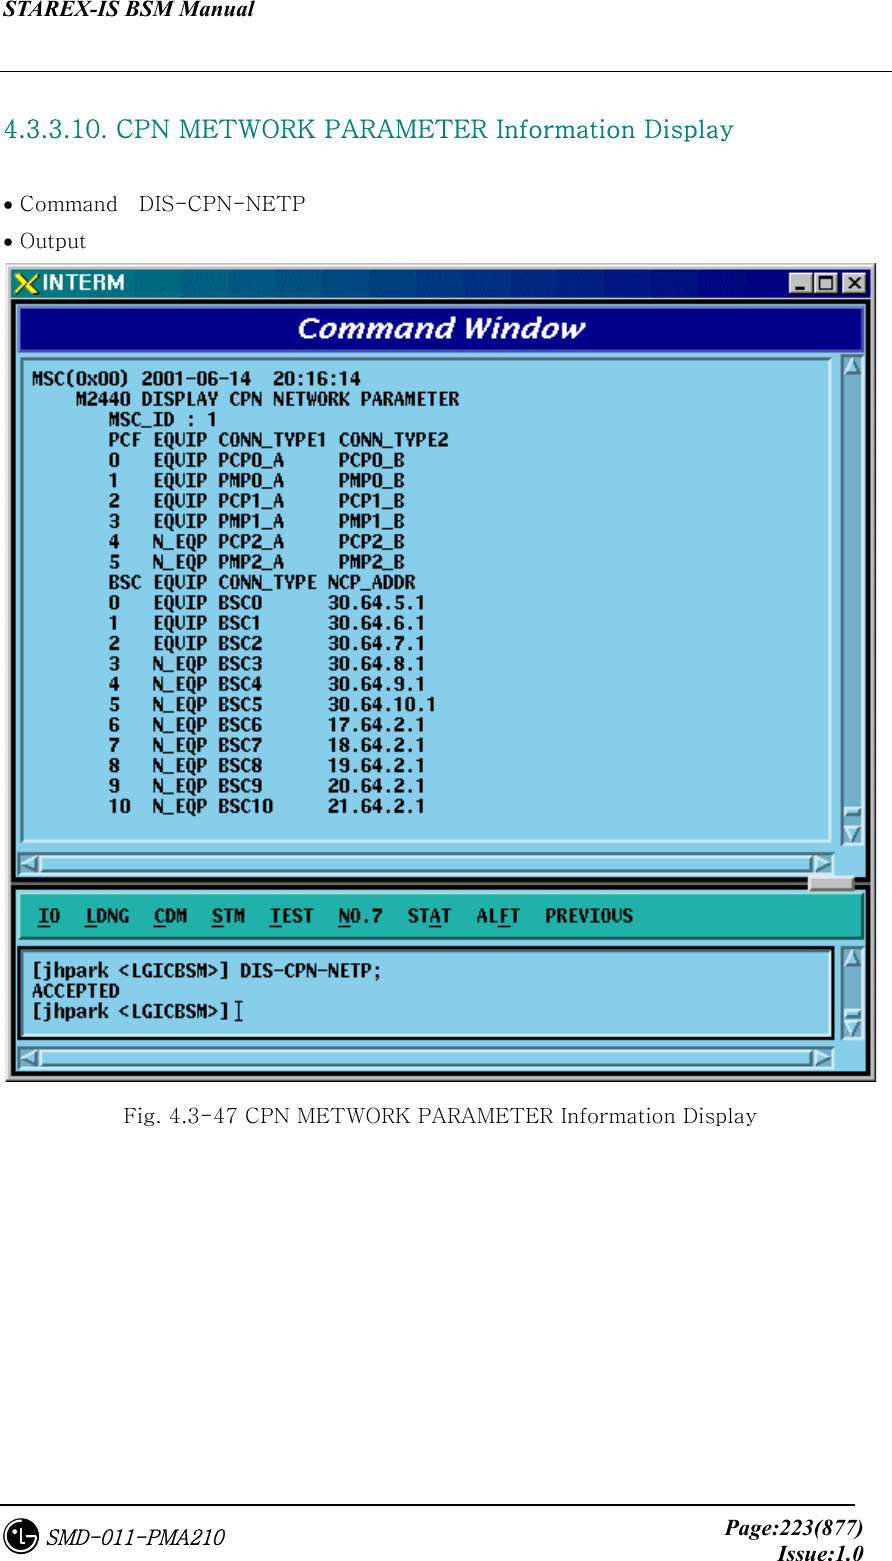 STAREX-IS BSM Manual     Page:223(877)Issue:1.0SMD-011-PMA210  4.3.3.10. CPN METWORK PARAMETER Information Display    • Command    DIS-CPN-NETP • Output  Fig. 4.3-47 CPN METWORK PARAMETER Information Display 